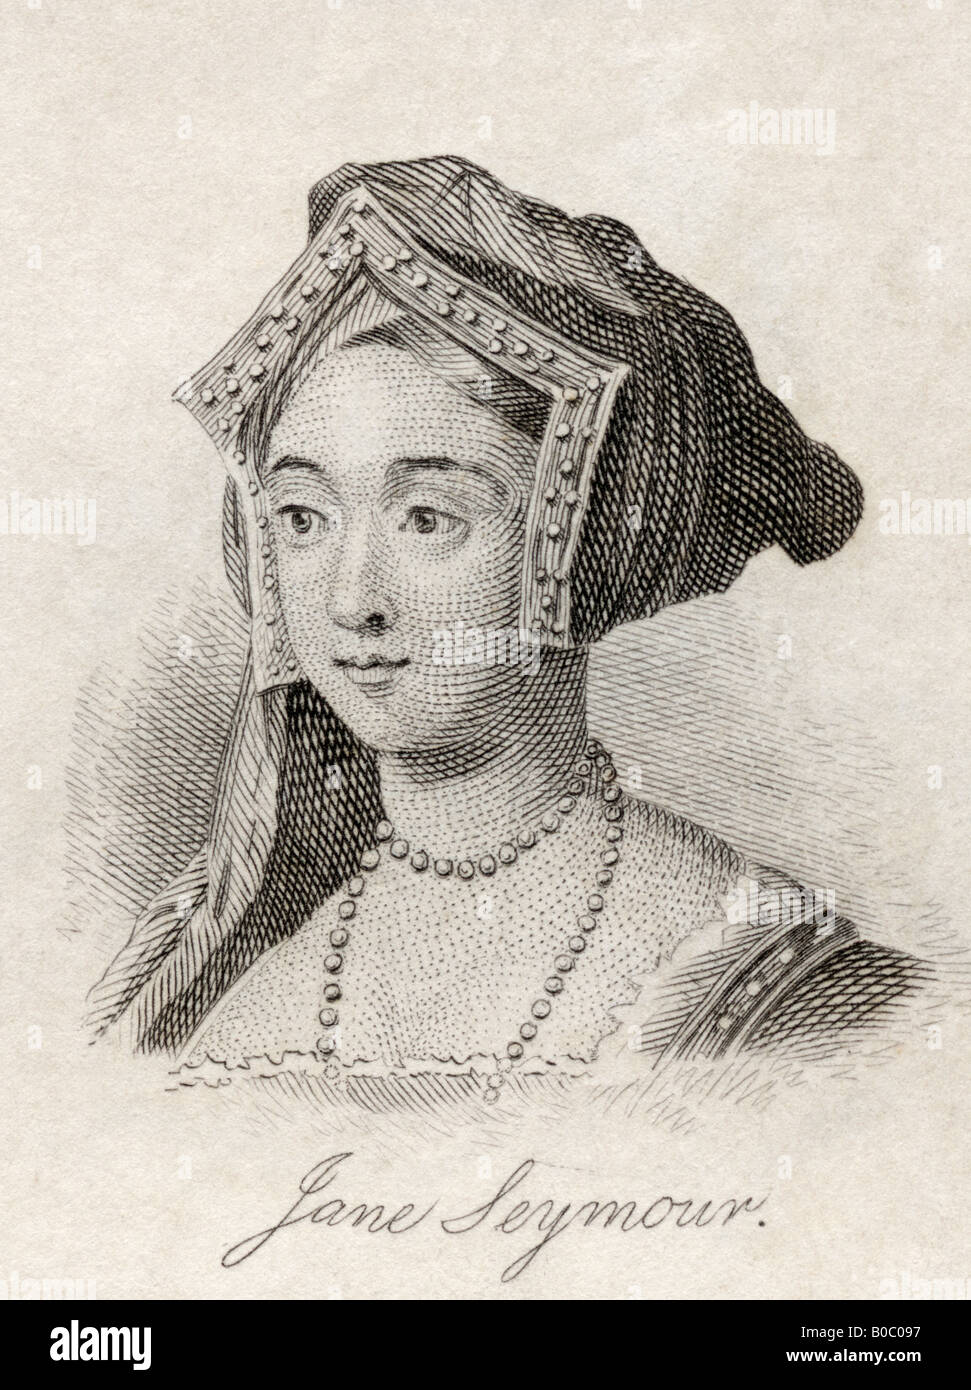 Jane Seymour, 1509 -1537. Third wife of Henry VIII of England. From the book Crabbs Historical Dictionary, published 1825. Stock Photo